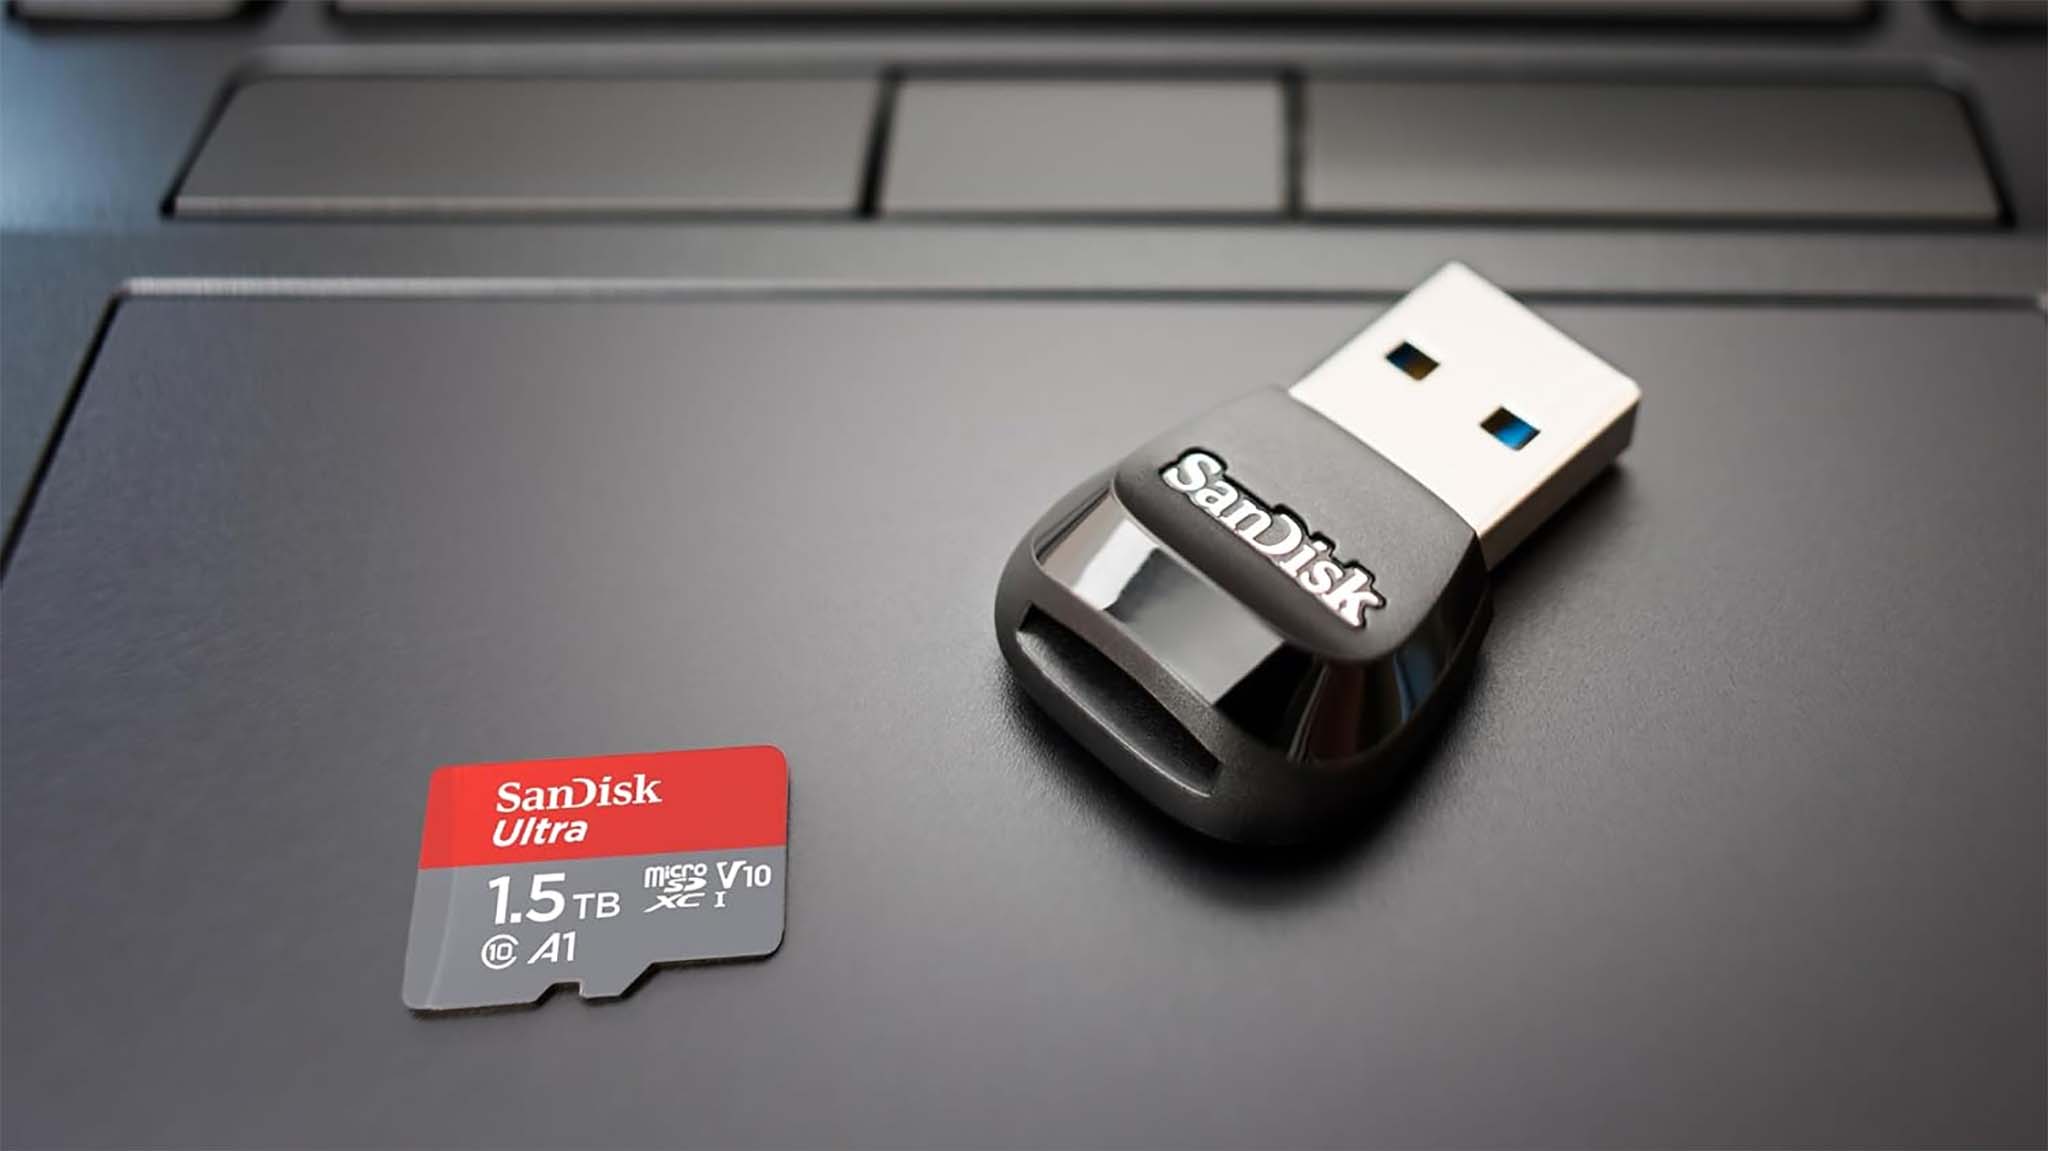 SanDisk 1.5TB microSD card and MobileMate USB 3.0.